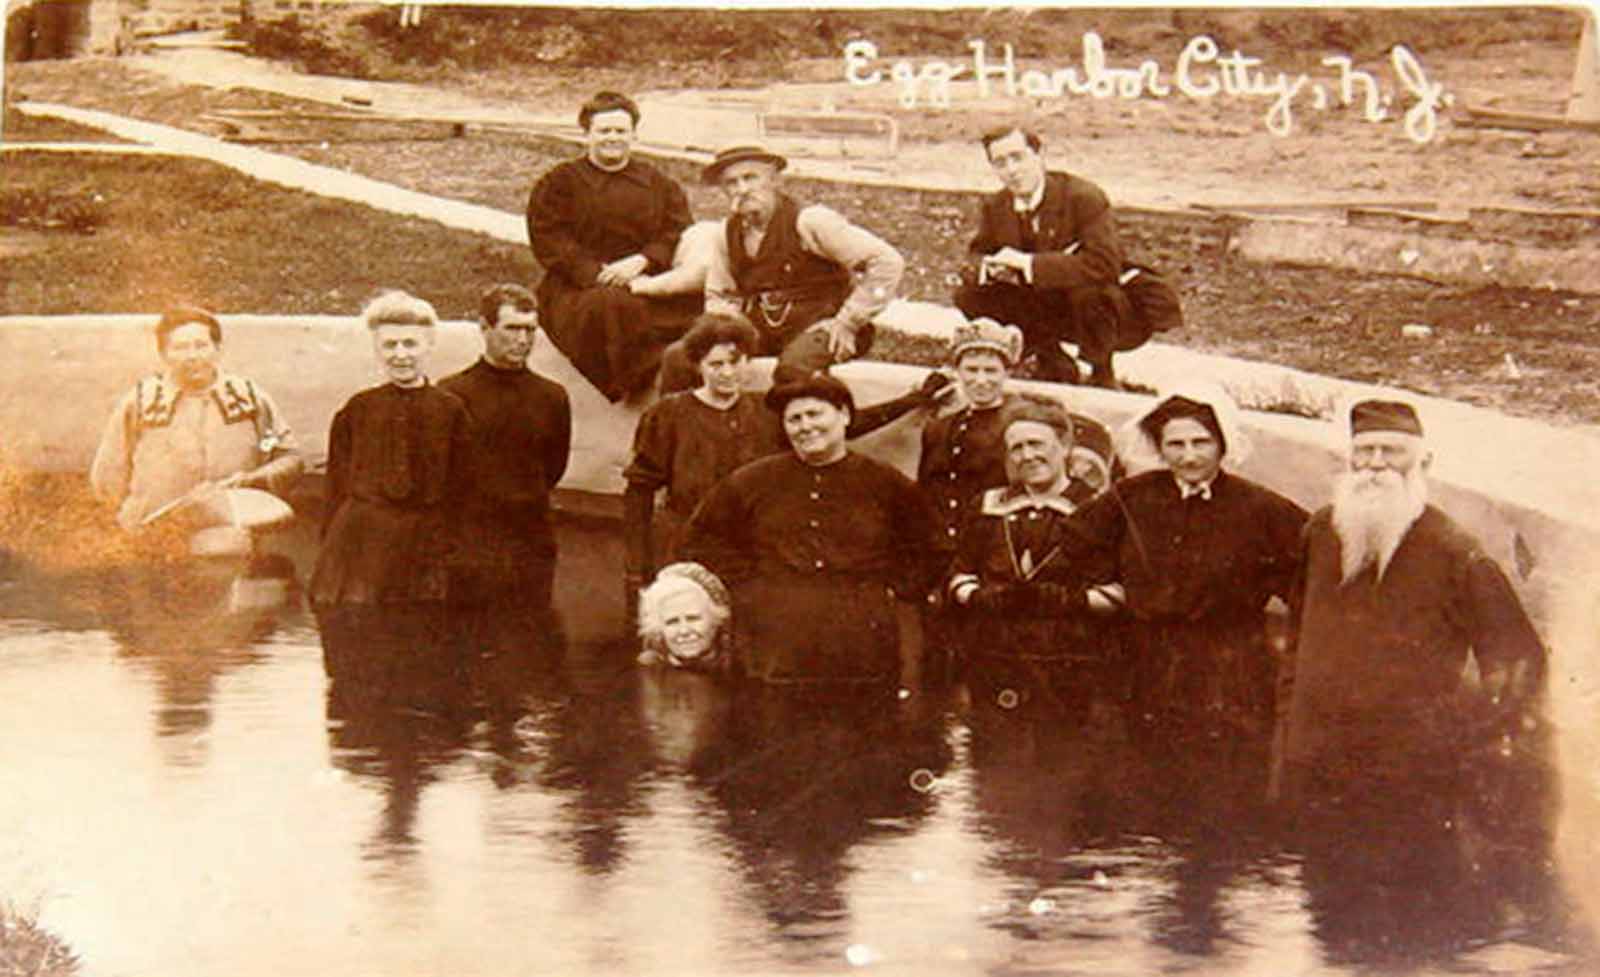 Egg Harbor City - An unidentified but intersting group - c 1910